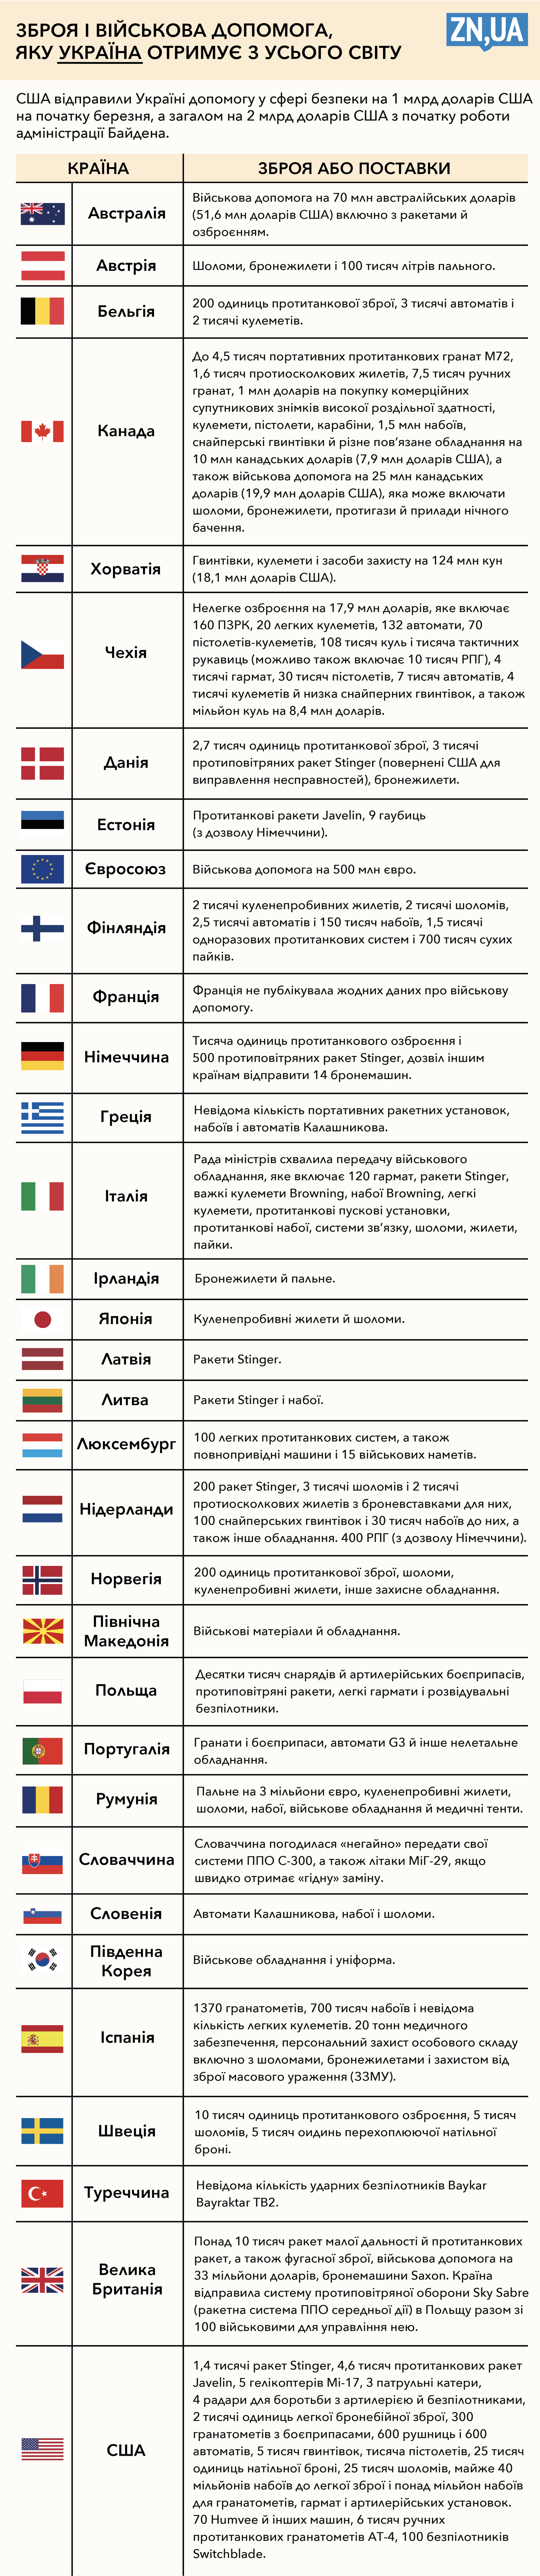 Politico: What weapons and military assistance does Ukraine receive from the world?